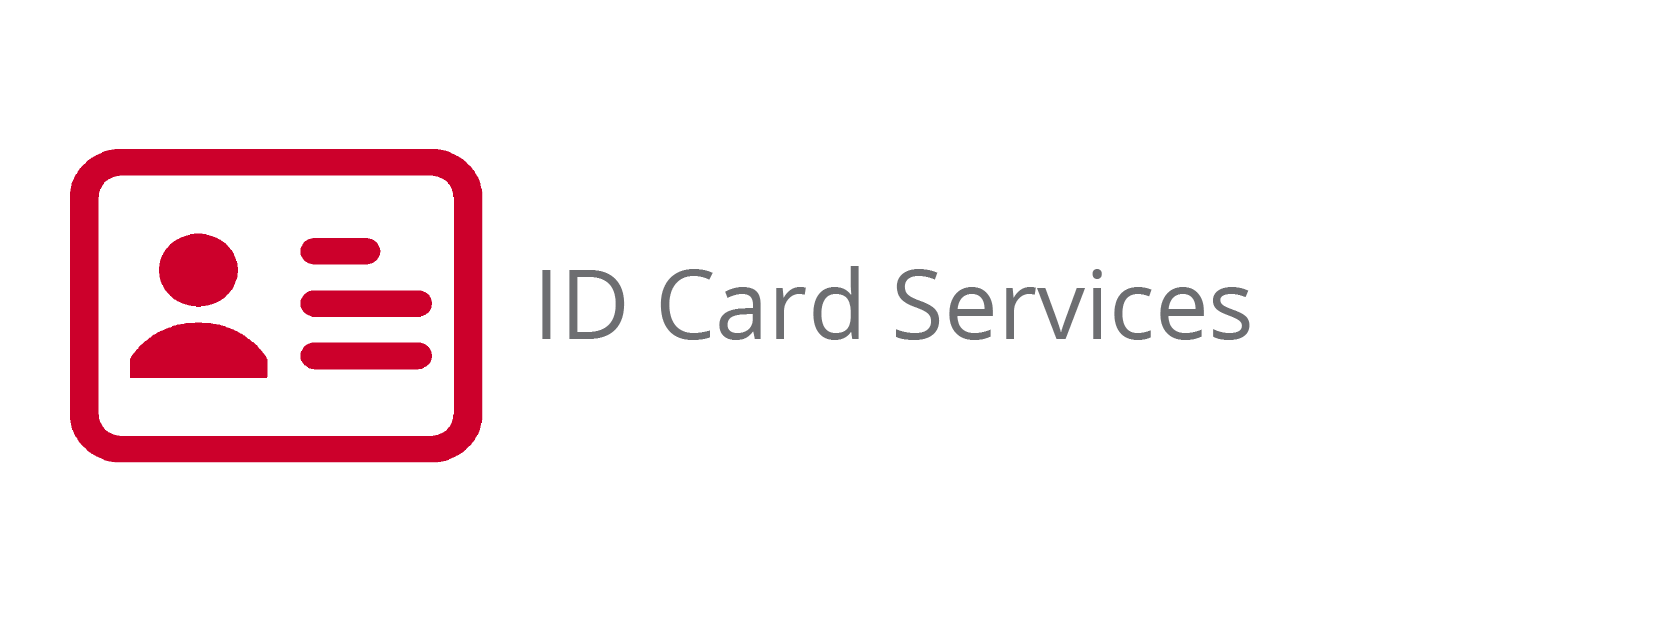 ID Card Services Button